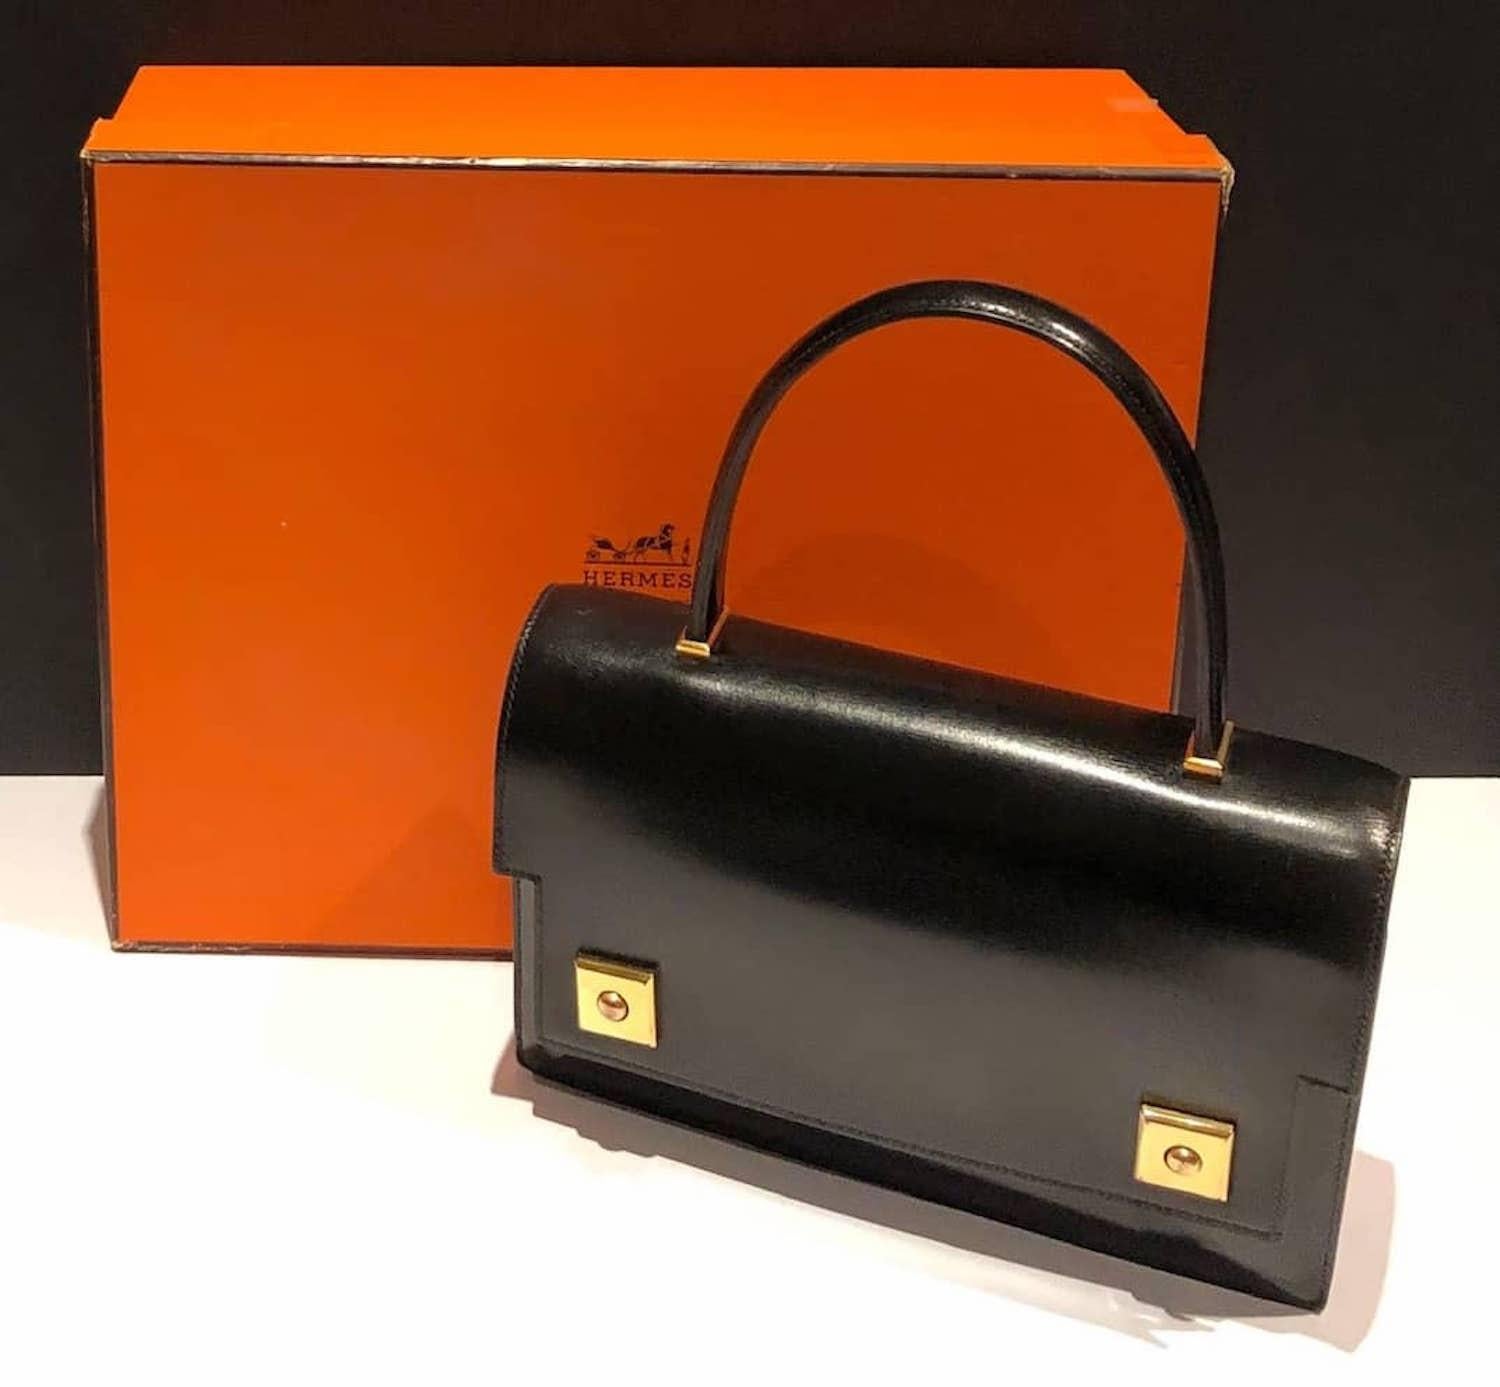 HERMÈS Piano Handbag Black Box Leather Vintage Circa 1960s W/Box
A classic HERMÈS vintage box leather 1968 Piano clasp handbag, in exceptional condition. This beautiful piano bag is handcrafted from black box leather with 18K gold plated hardware.